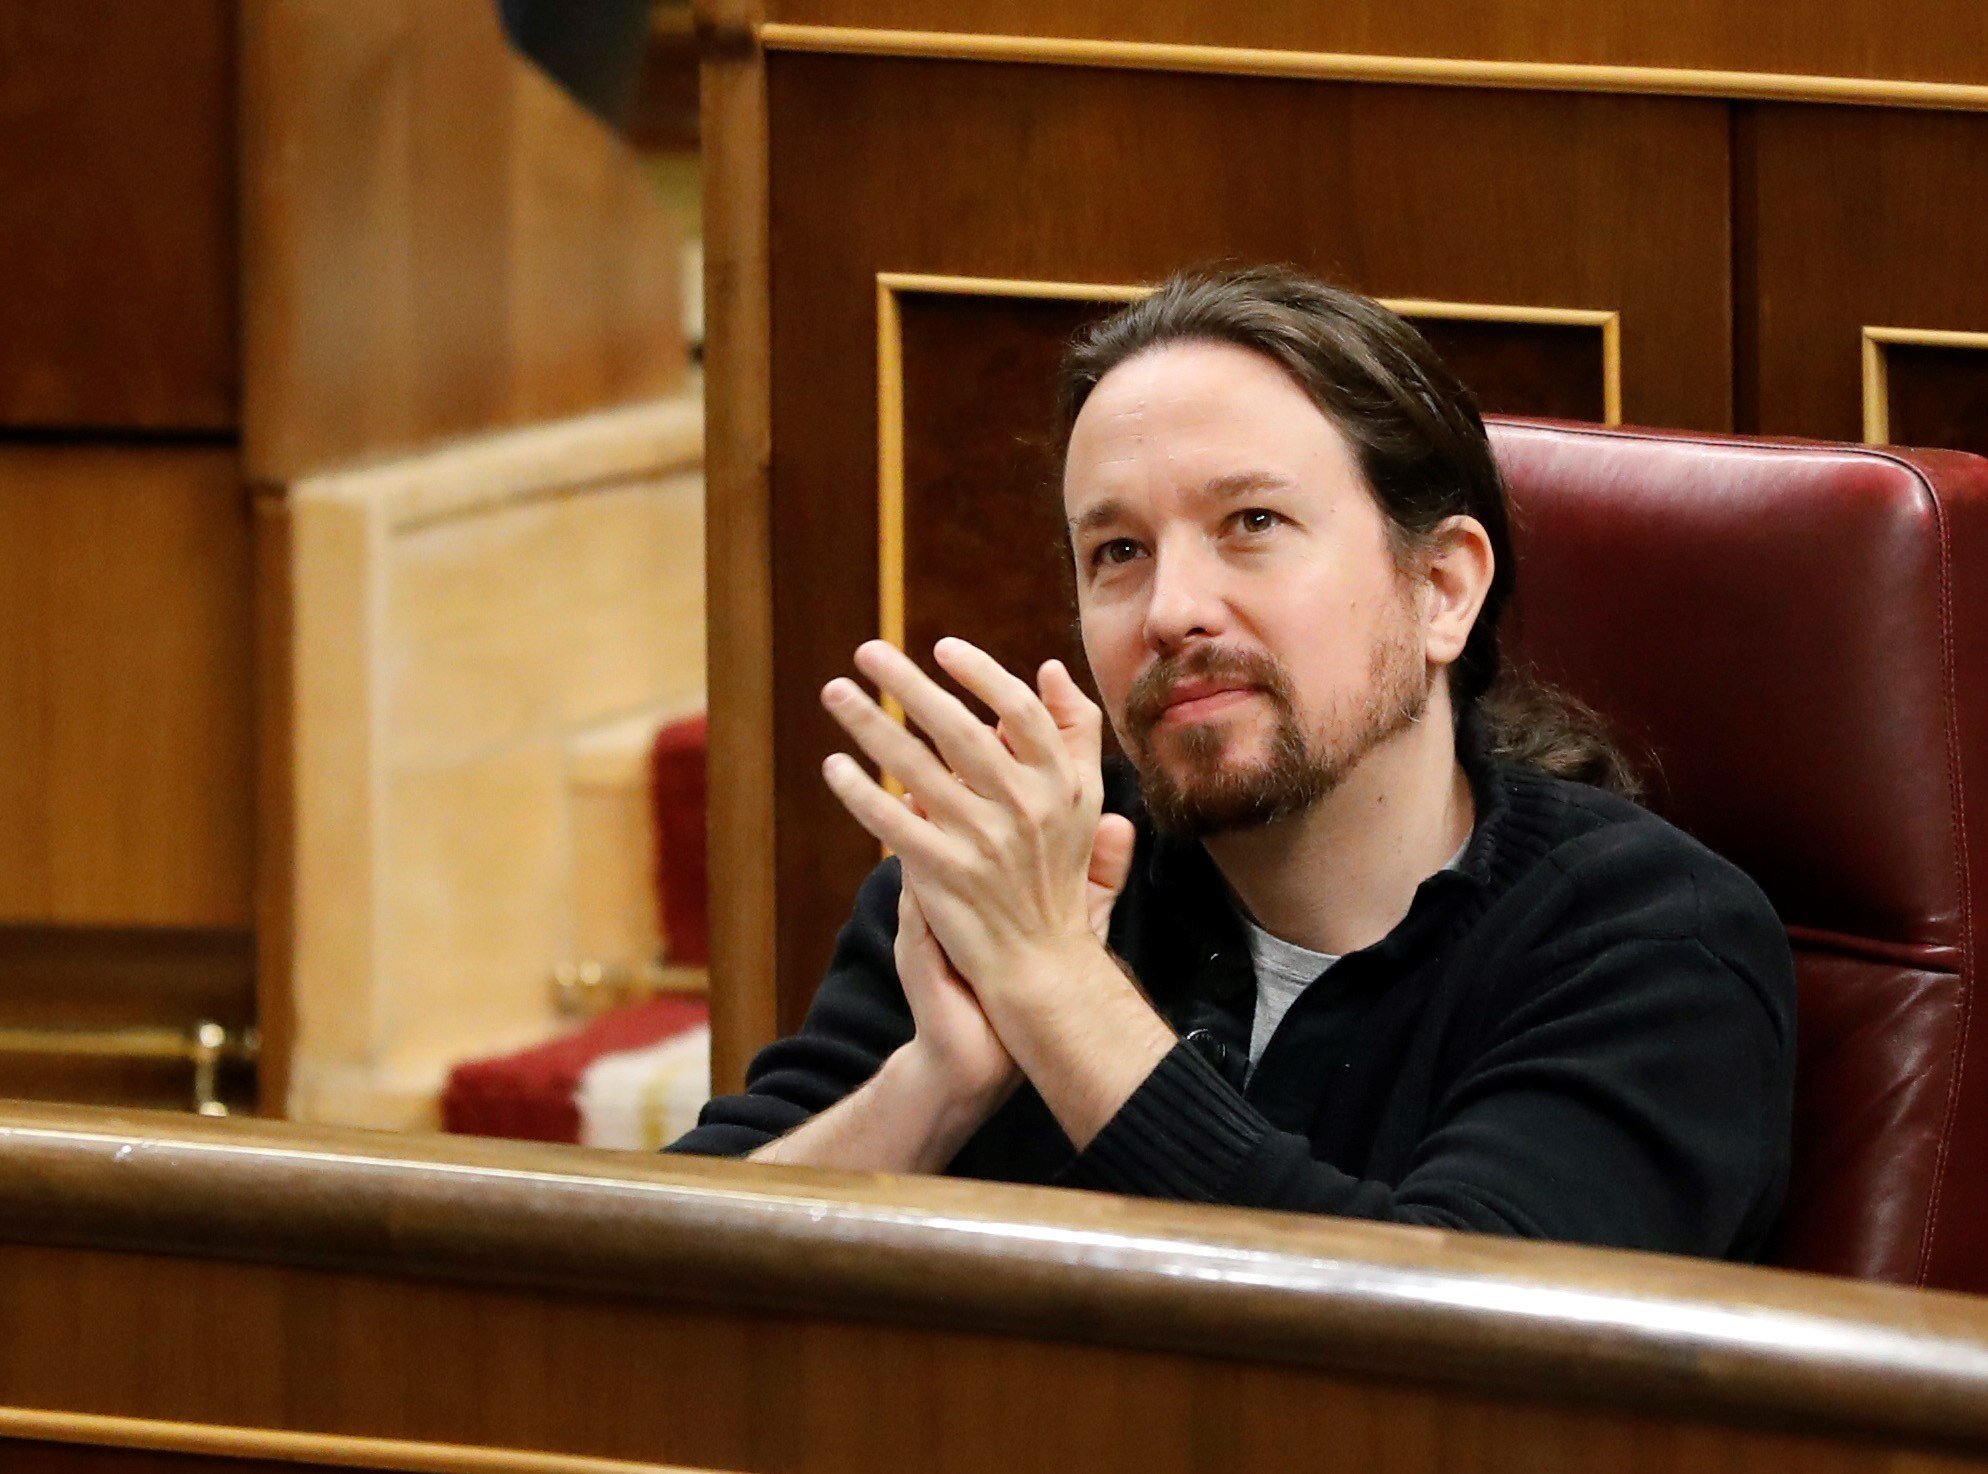 Iglesias backtracks, now says suspending Catalan autonomy would be "unacceptable"